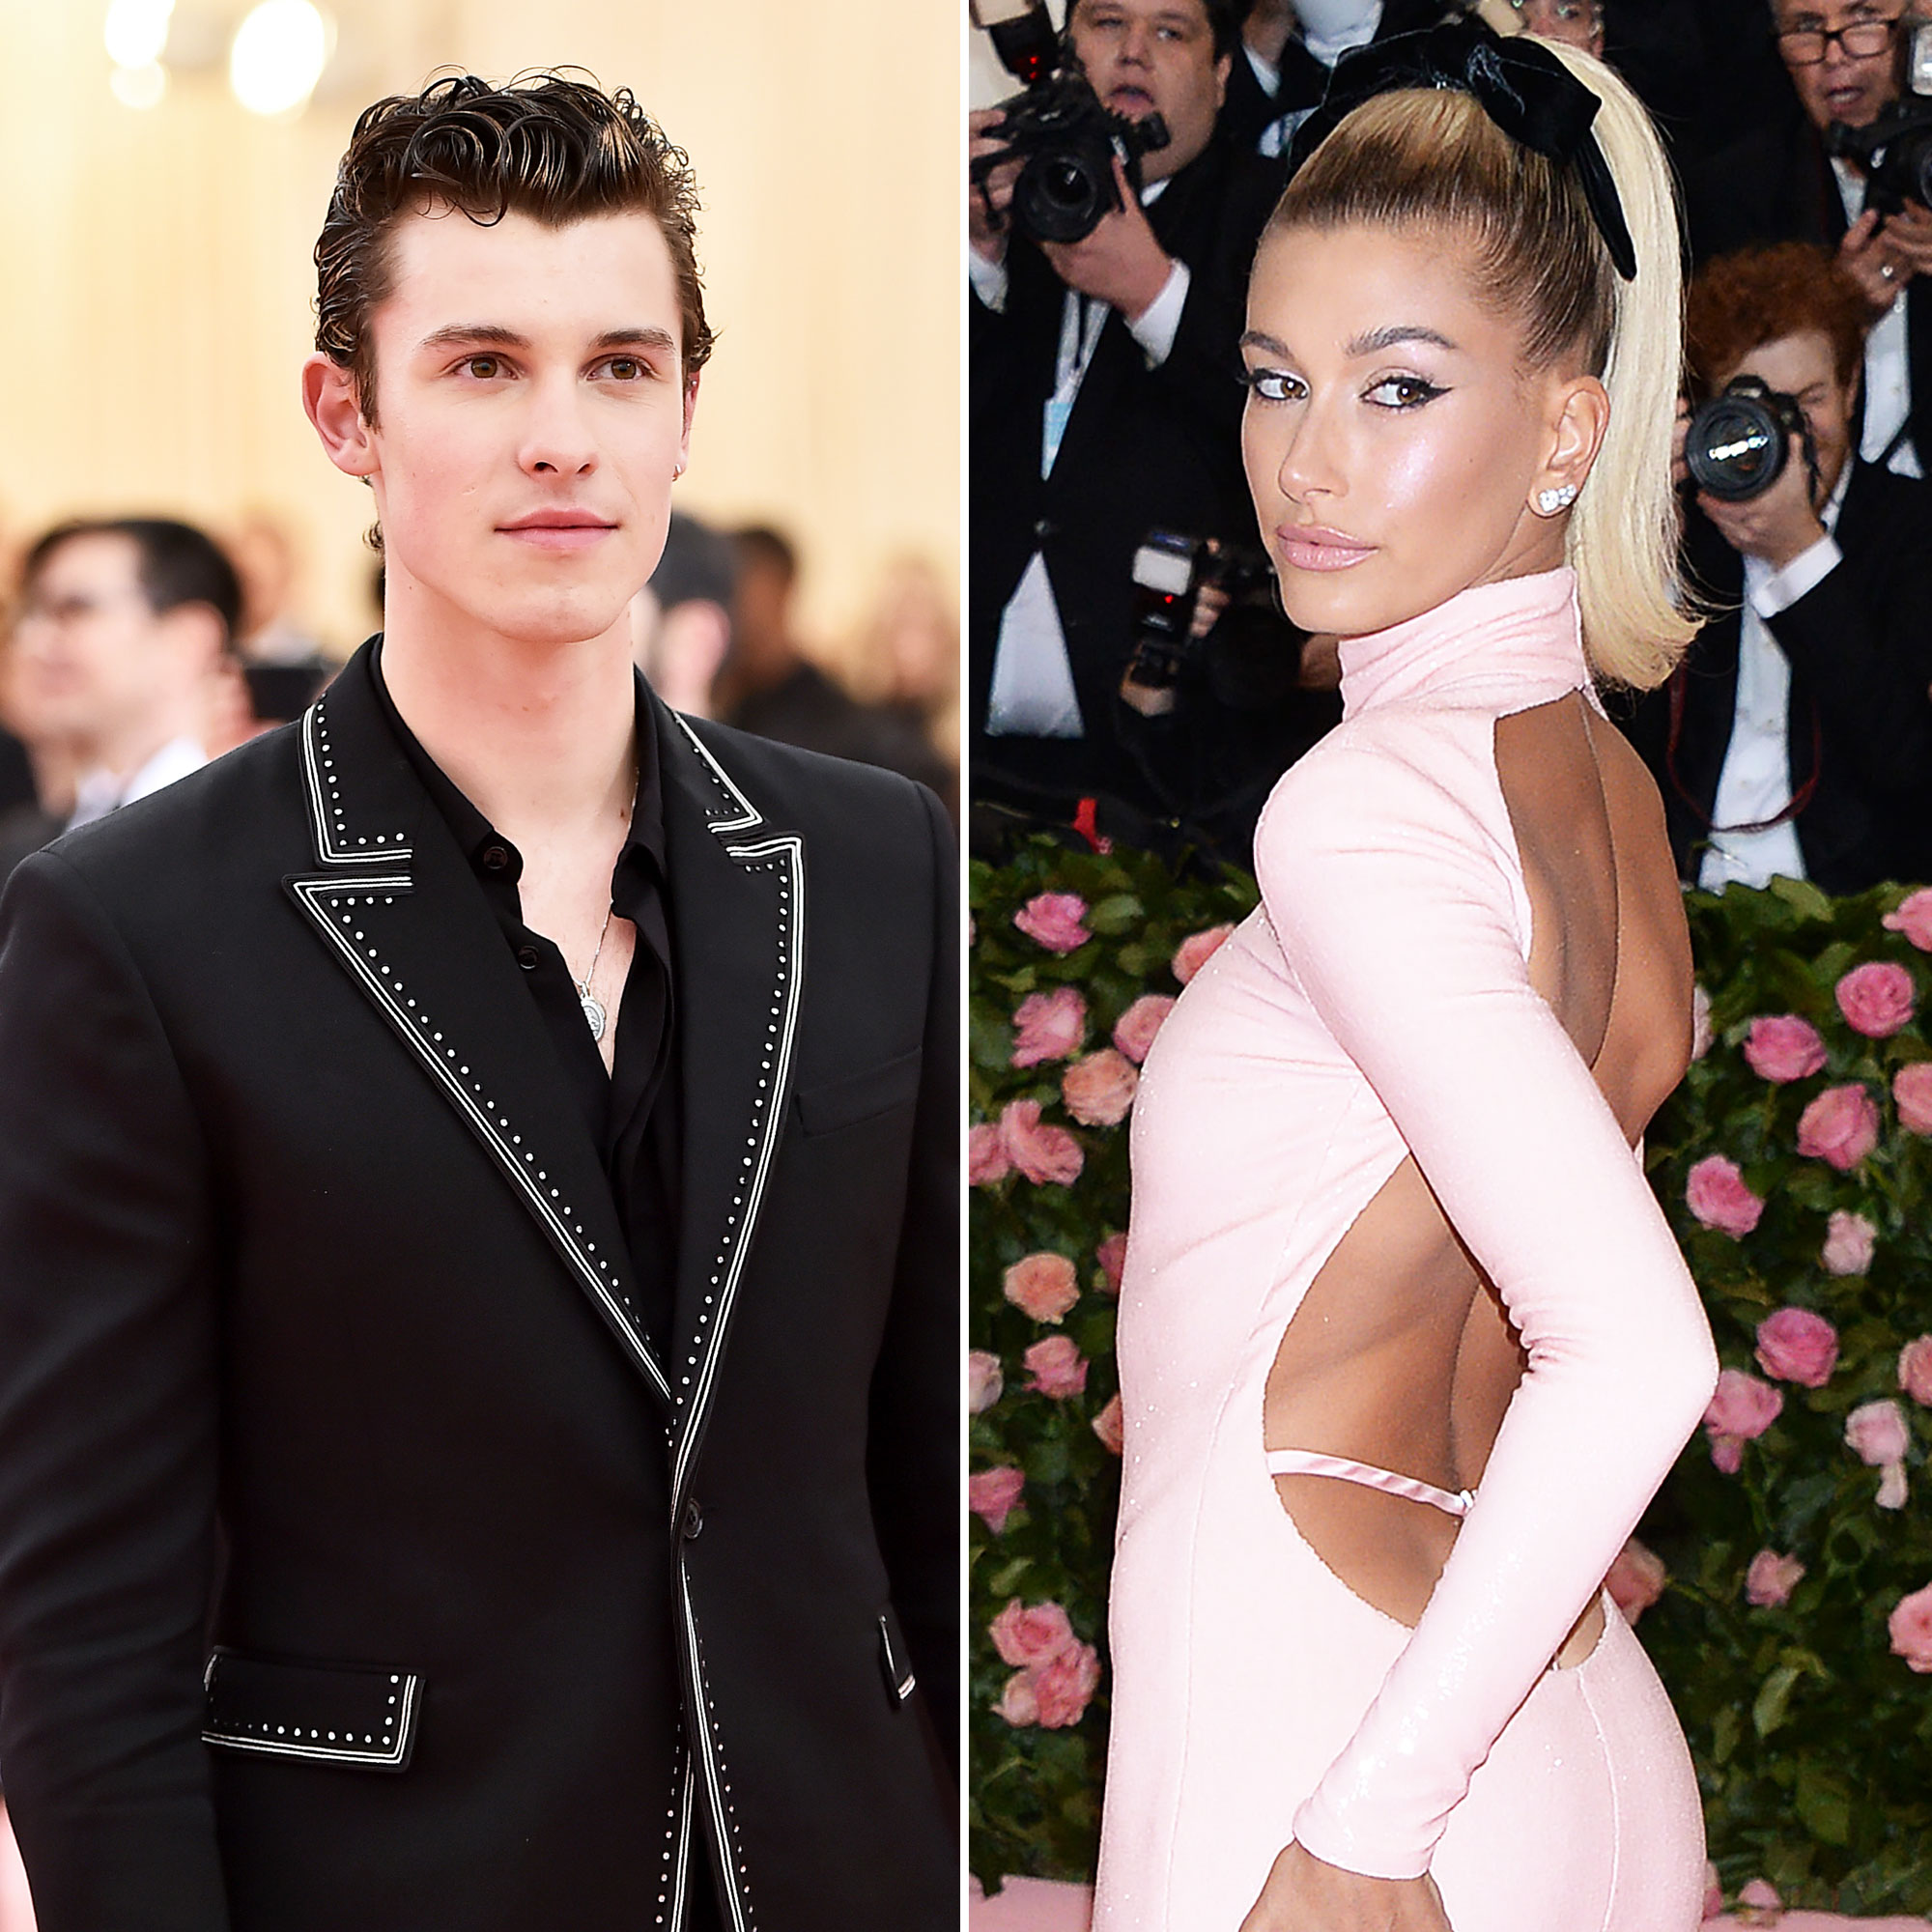 Met Gala 2019 Exes Shawn Mendes Hailey Baldwin Attend Solo